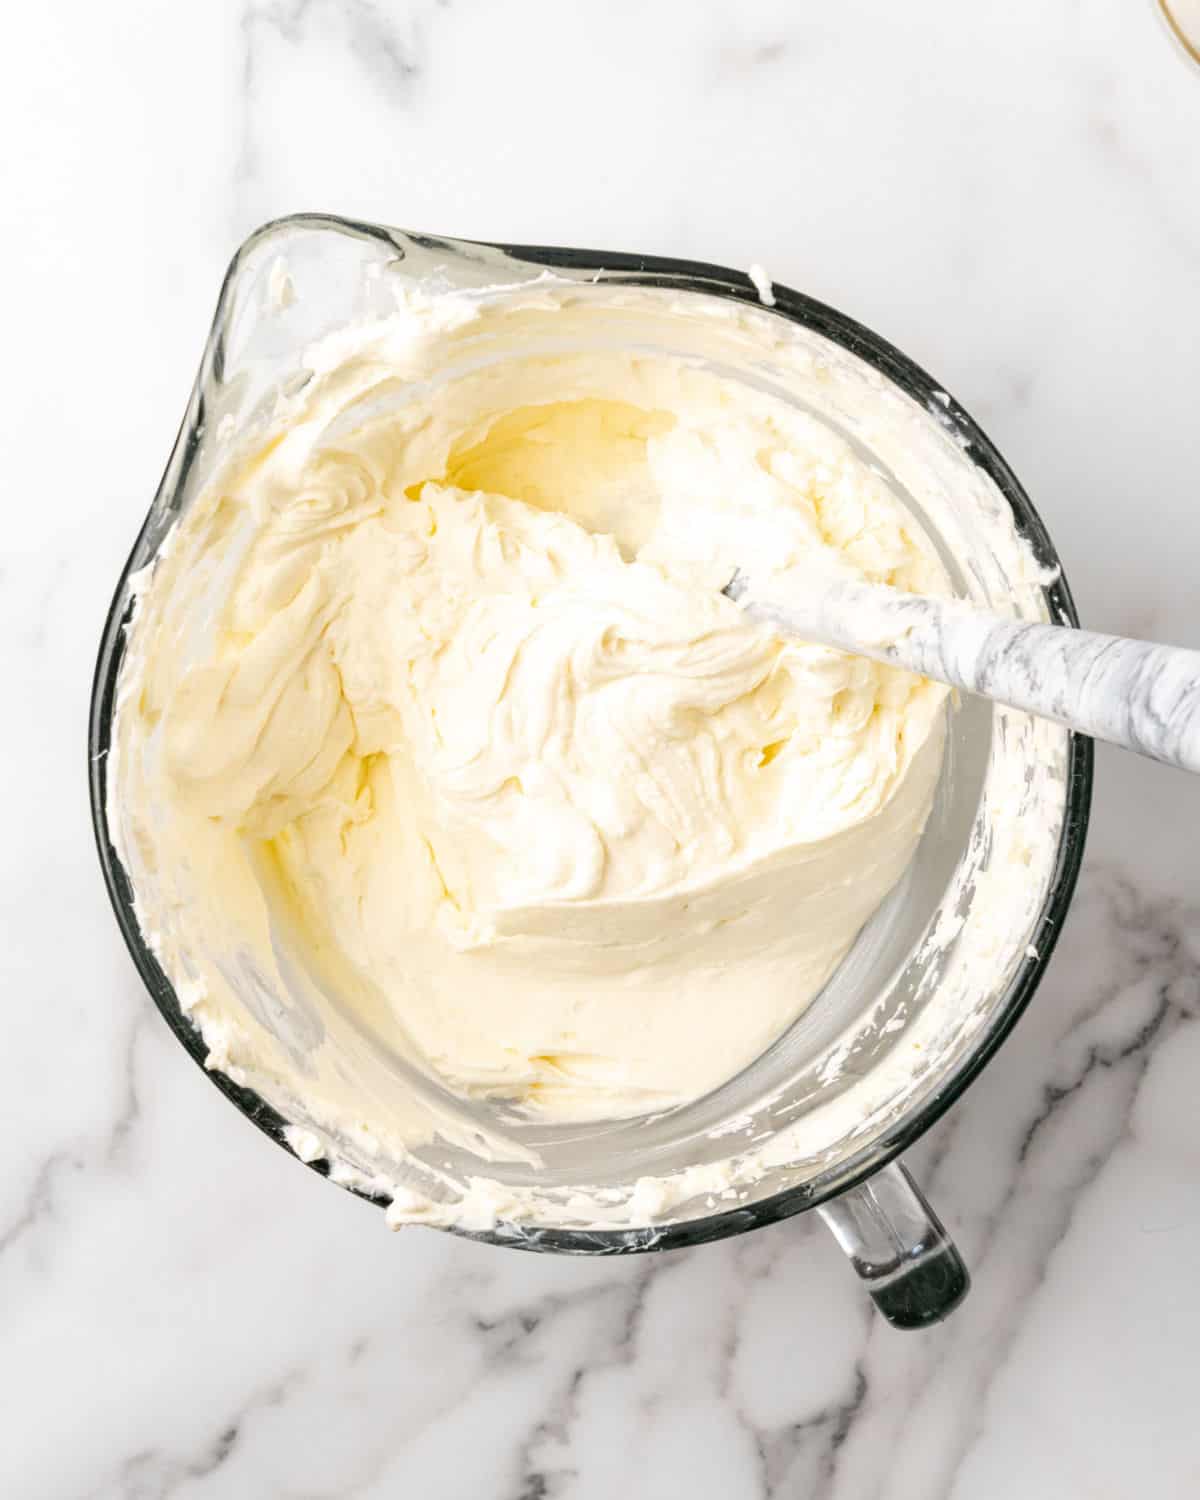 Cream cheese mixture for cheesecake in a glass bowl on a white marble surface.